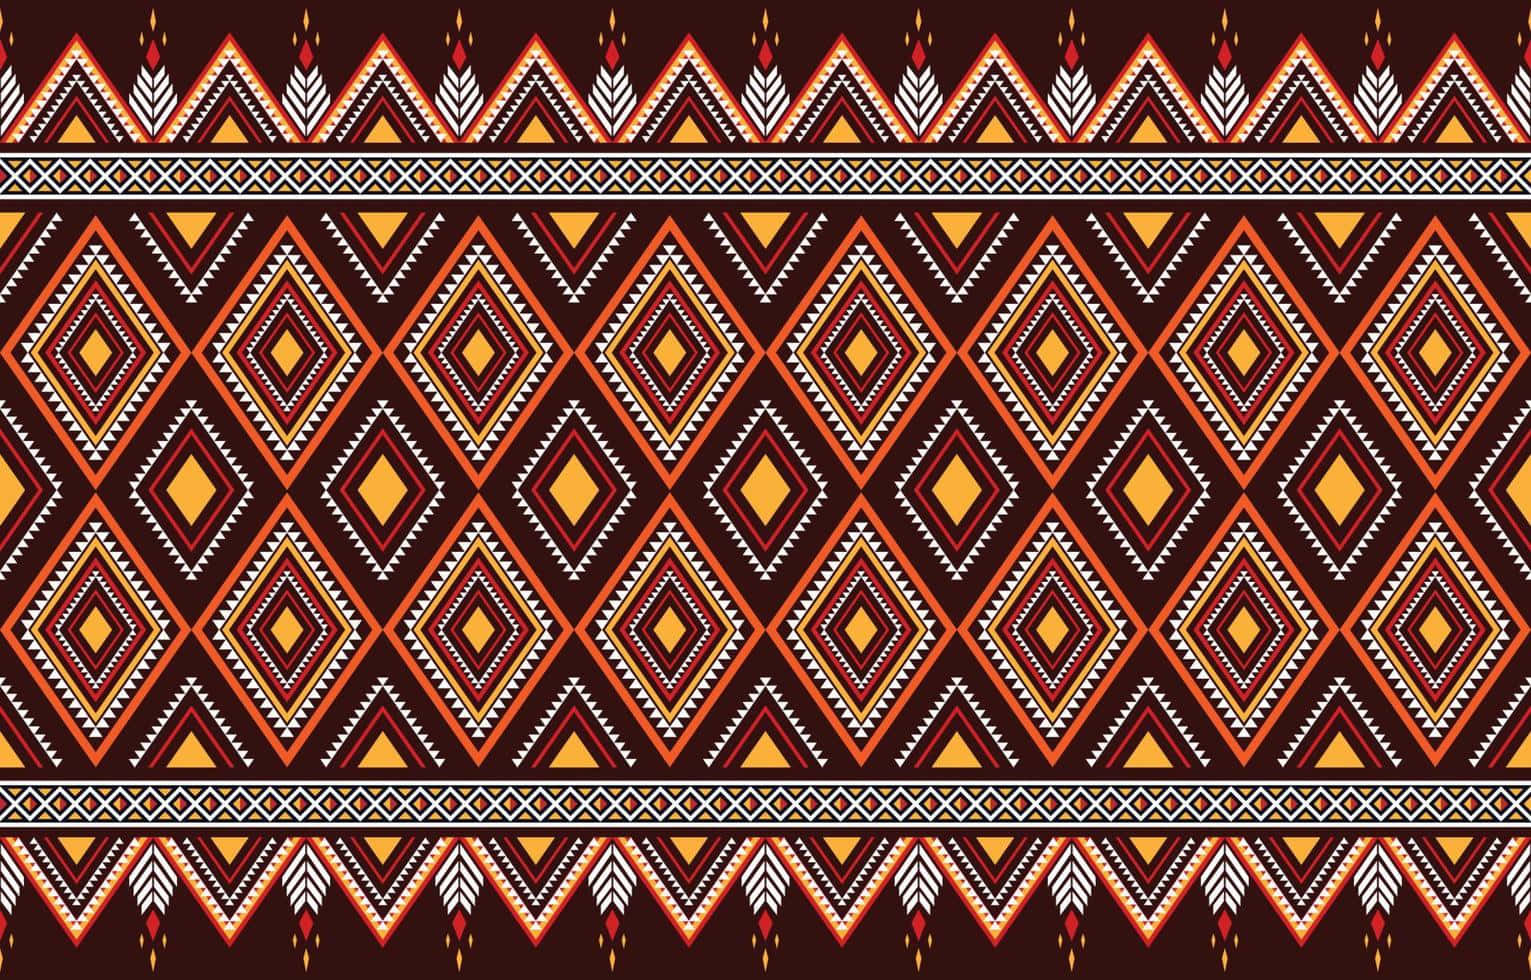 A Tribal Pattern With Brown And Yellow Colors